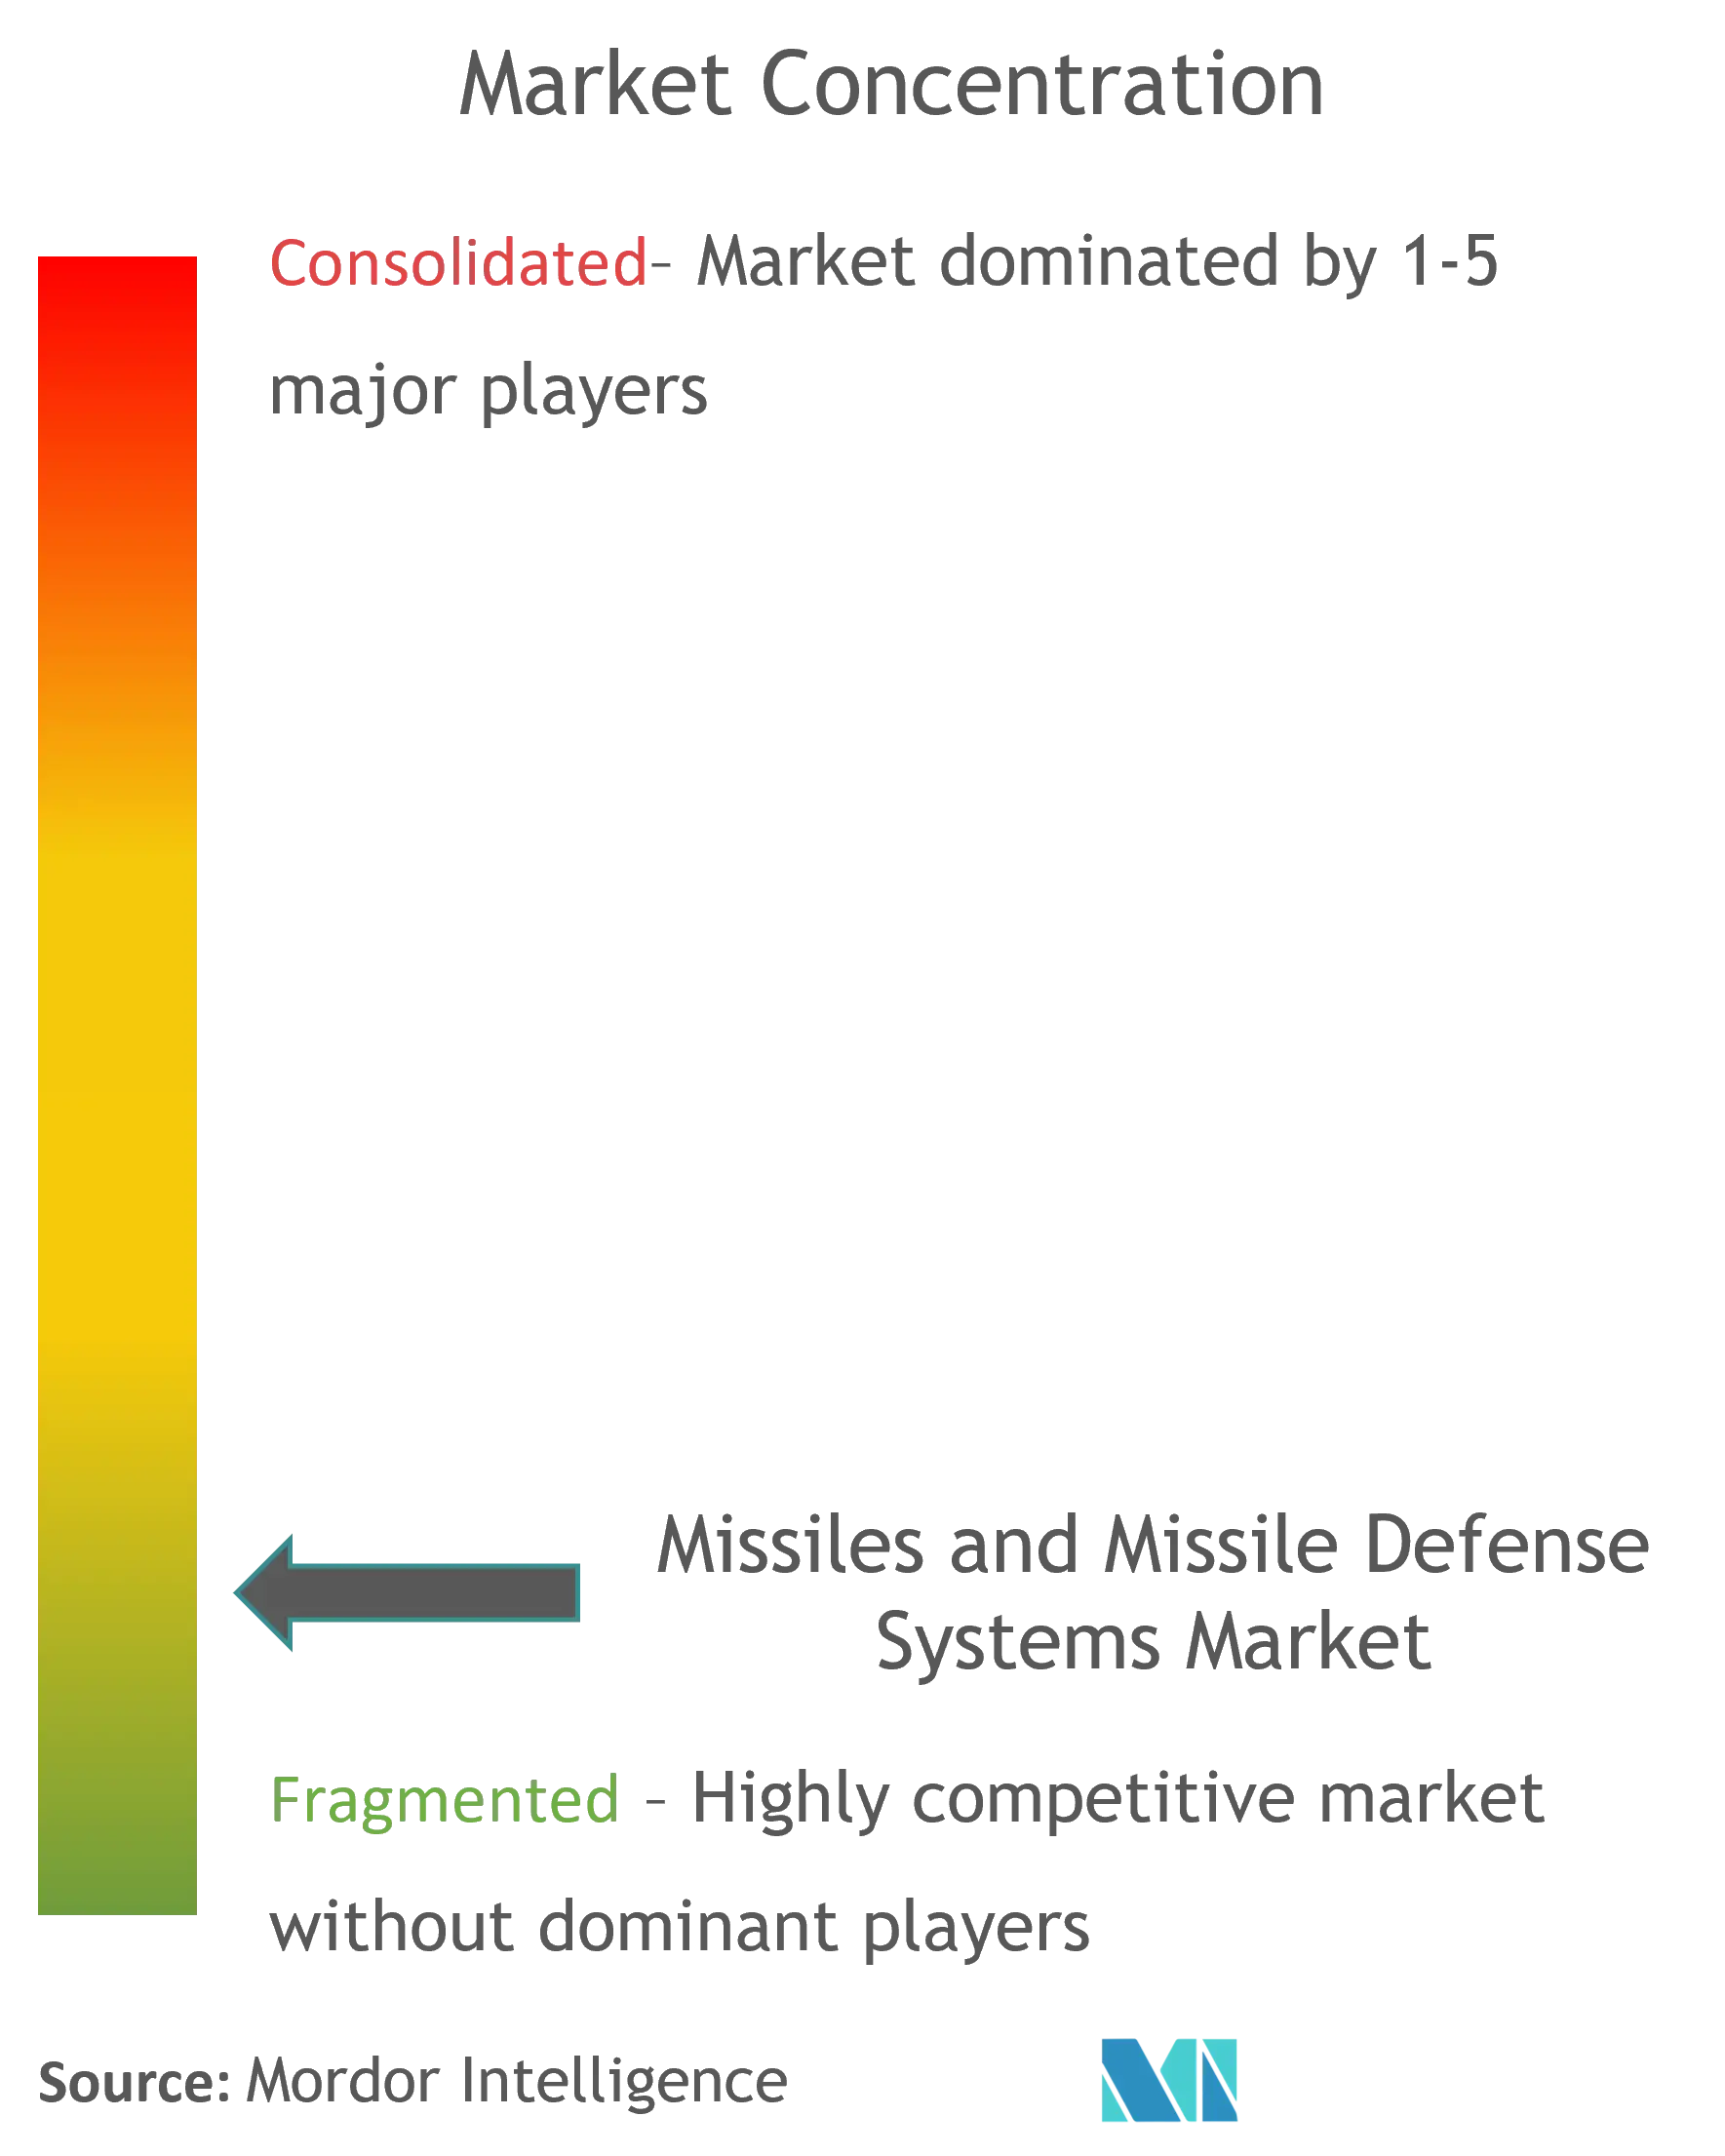 missiles and missile defense market updated CL.png